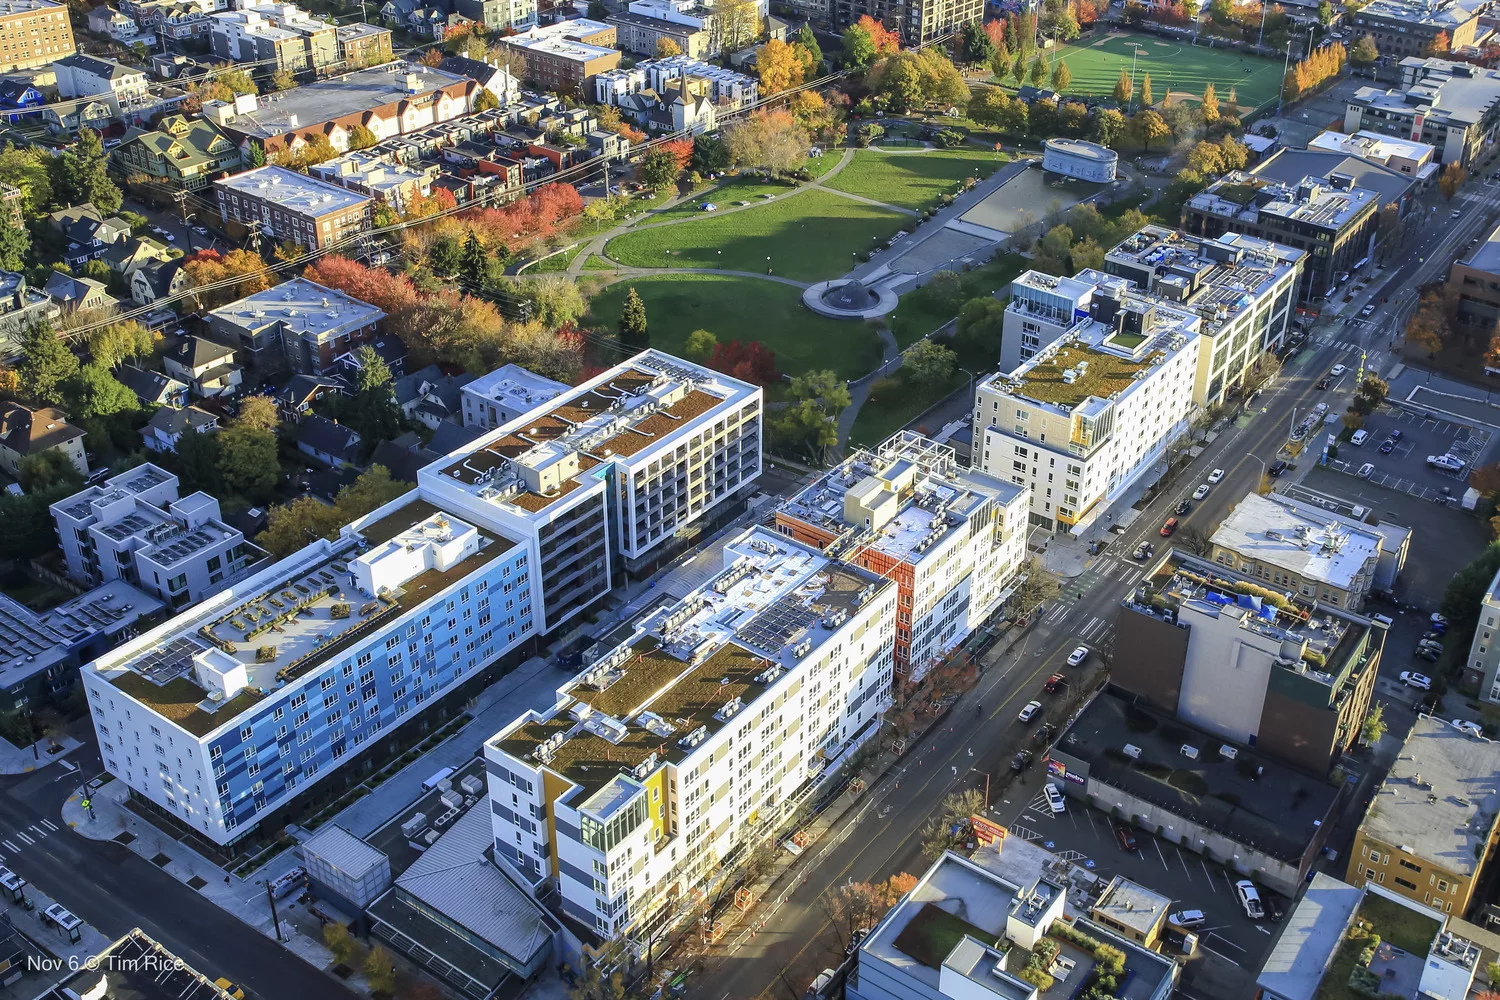 Aerial daylight view of Site A of Sound Transit's Capitol Hill transit-oriented development with Cal Anderson Park in the distance and surrounding low-rise residential and commercial buildings